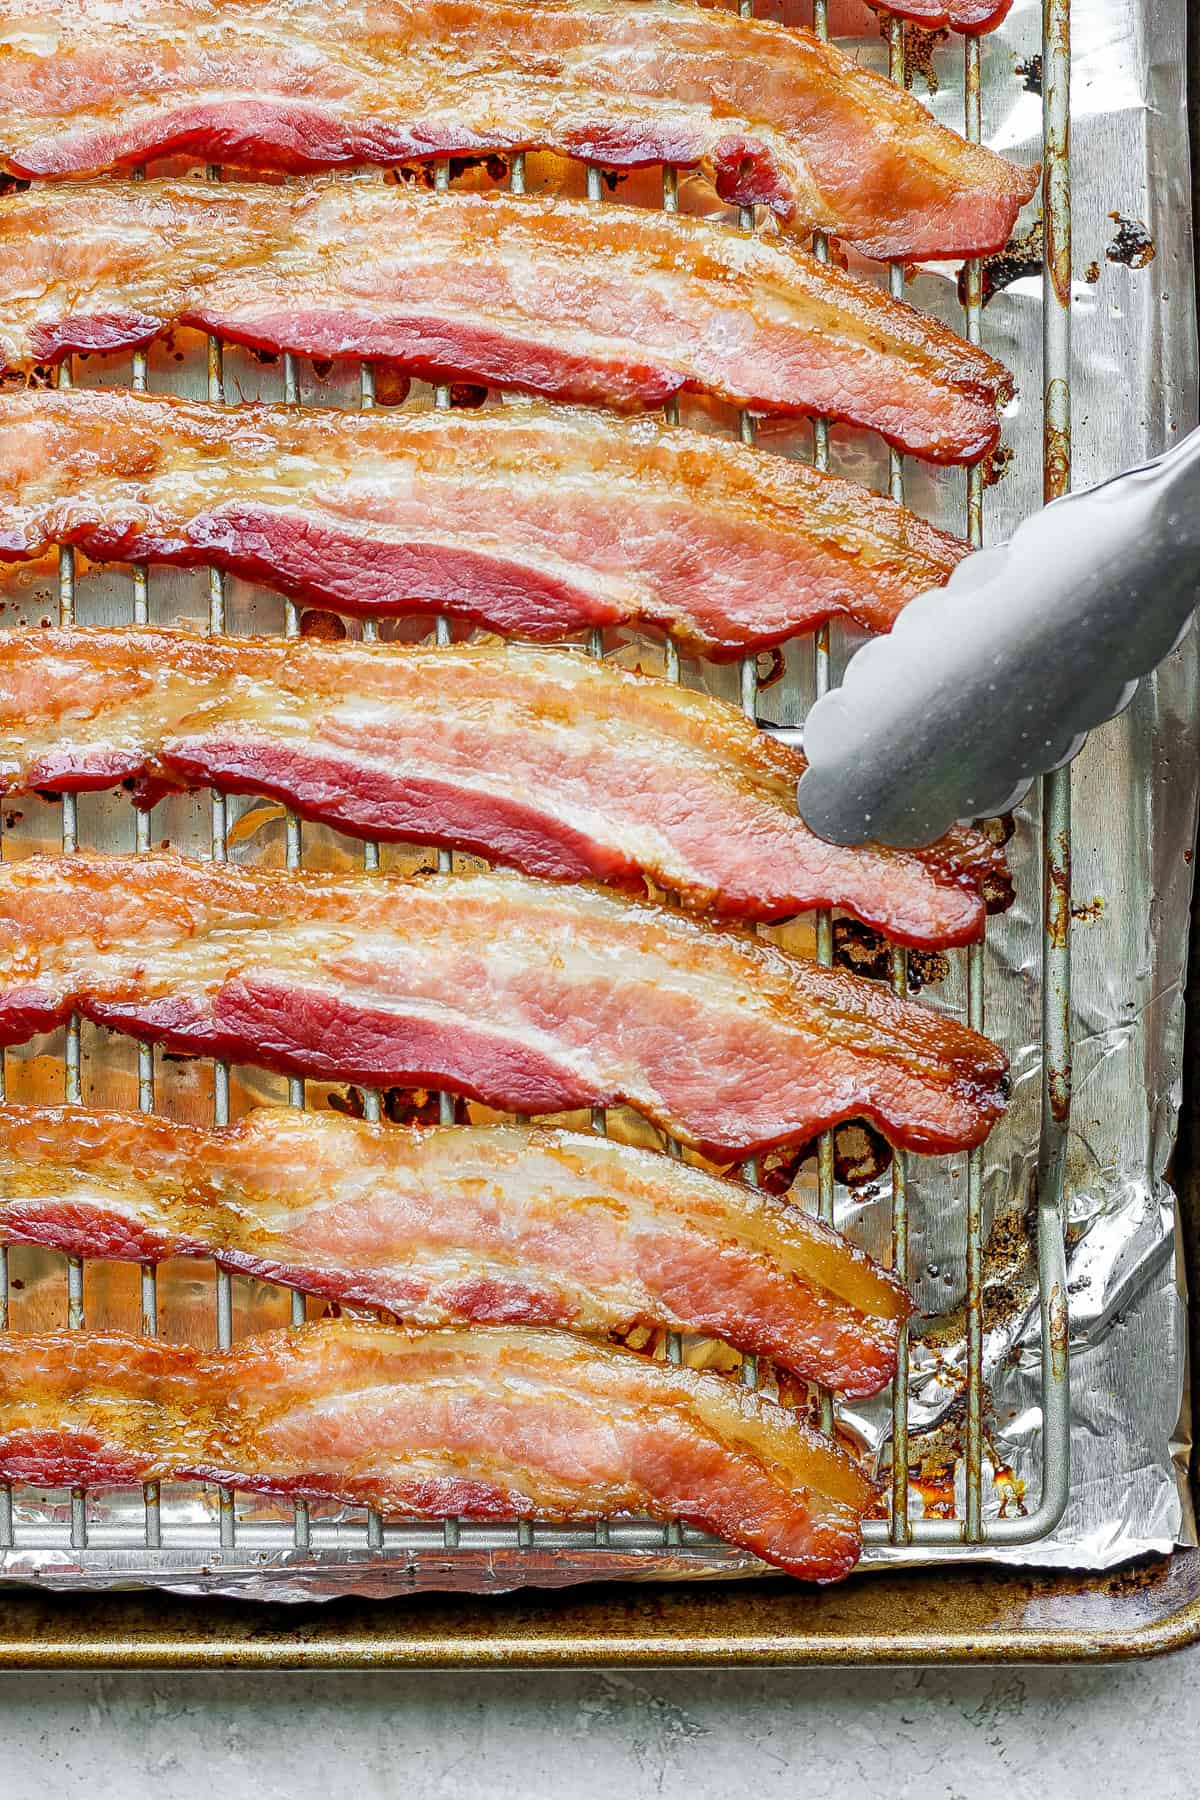 How to Cook Bacon in the Oven (Perfect Oven Baked Bacon!) - Fit